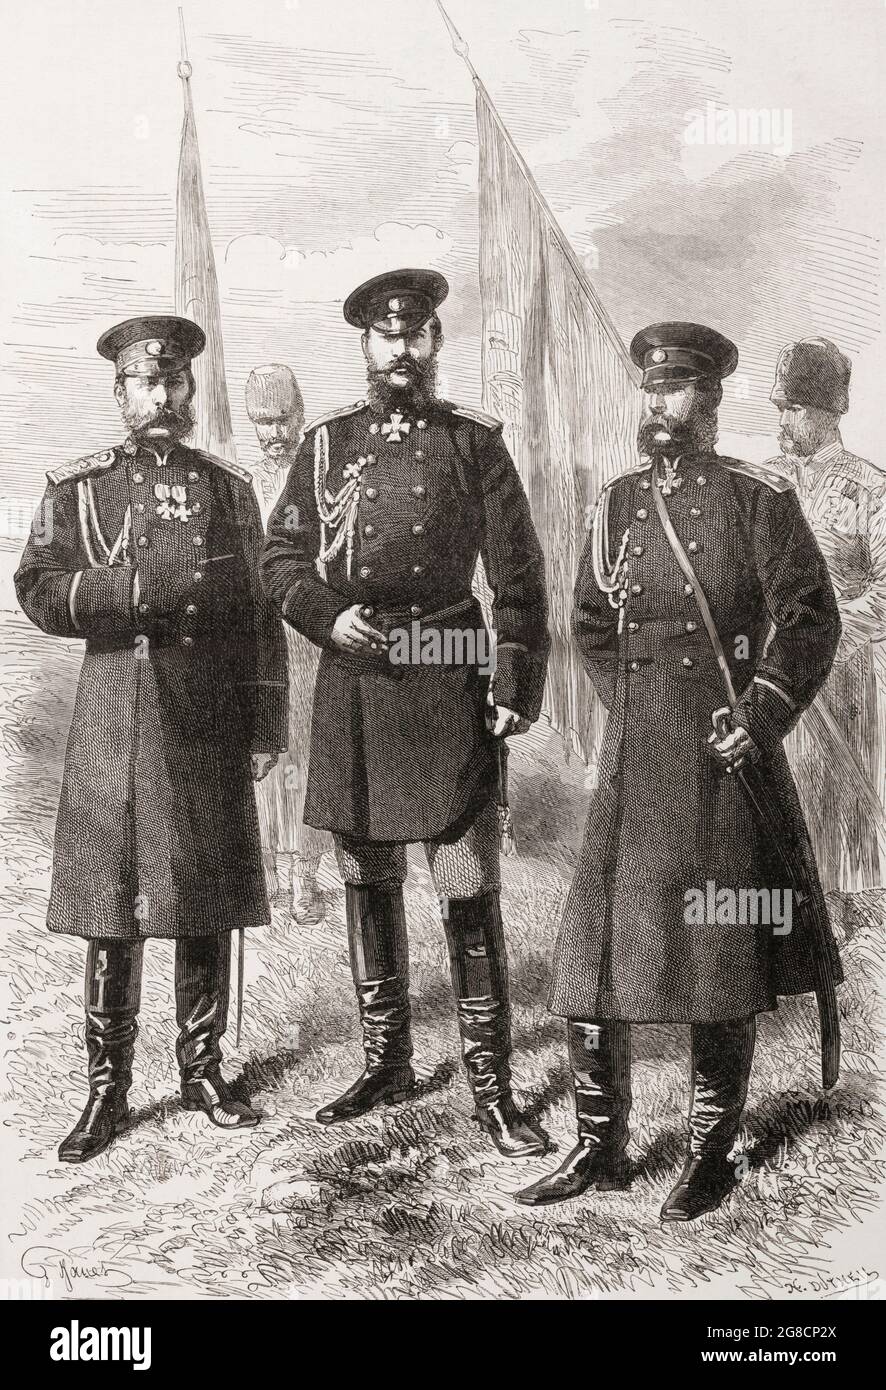 Caucasian Army General Staff, left to right, - Prince Dmitry Ivanovich Svyatopolk-Mirsky 1825–1899. Imperial Russian Army general, politician and member of the princely Svyatopolk-Mirsky family.  Grand Duke Michael Nikolaevich of Russia,1832 – 1909. Nominal Commander-in-Chief of the Russian troops during the Russo-Turkish War (1877-1878), and appointed Field Marshal General in April 1878.  Count Mikhail Tarielovich Loris-Melikov, 1824 - 1888.  Russian-Armenian statesman, General of the Cavalry, and Adjutant General of H. I. M. Retinue.  From Russes et Turcs, La Guerre D'Orient, published 1878. Stock Photo